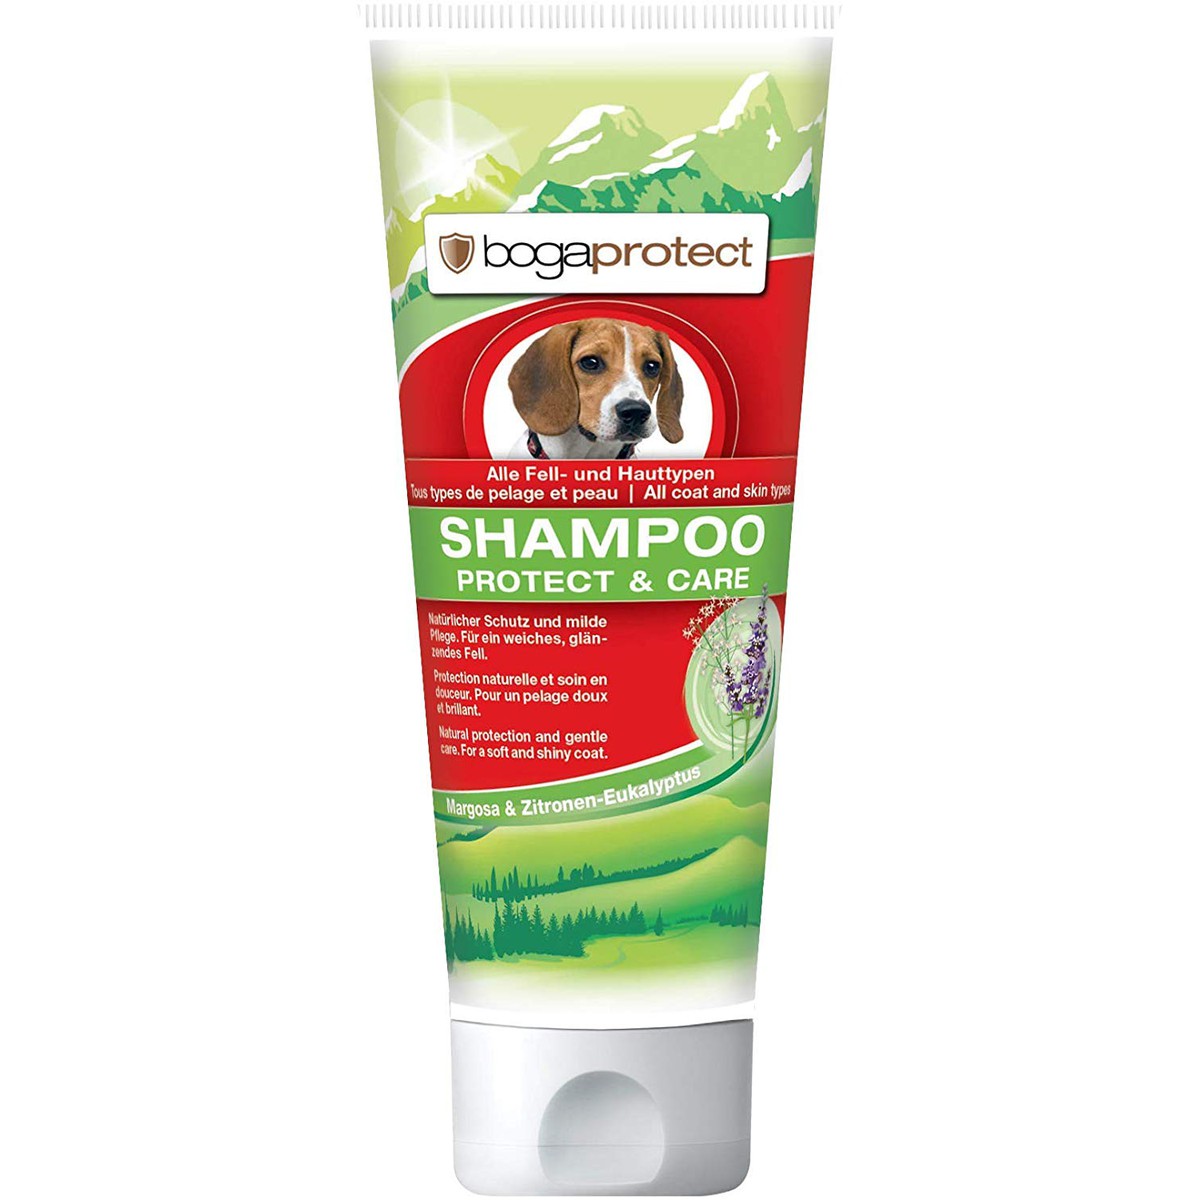   Bogaprotect shampoing chien  200ml